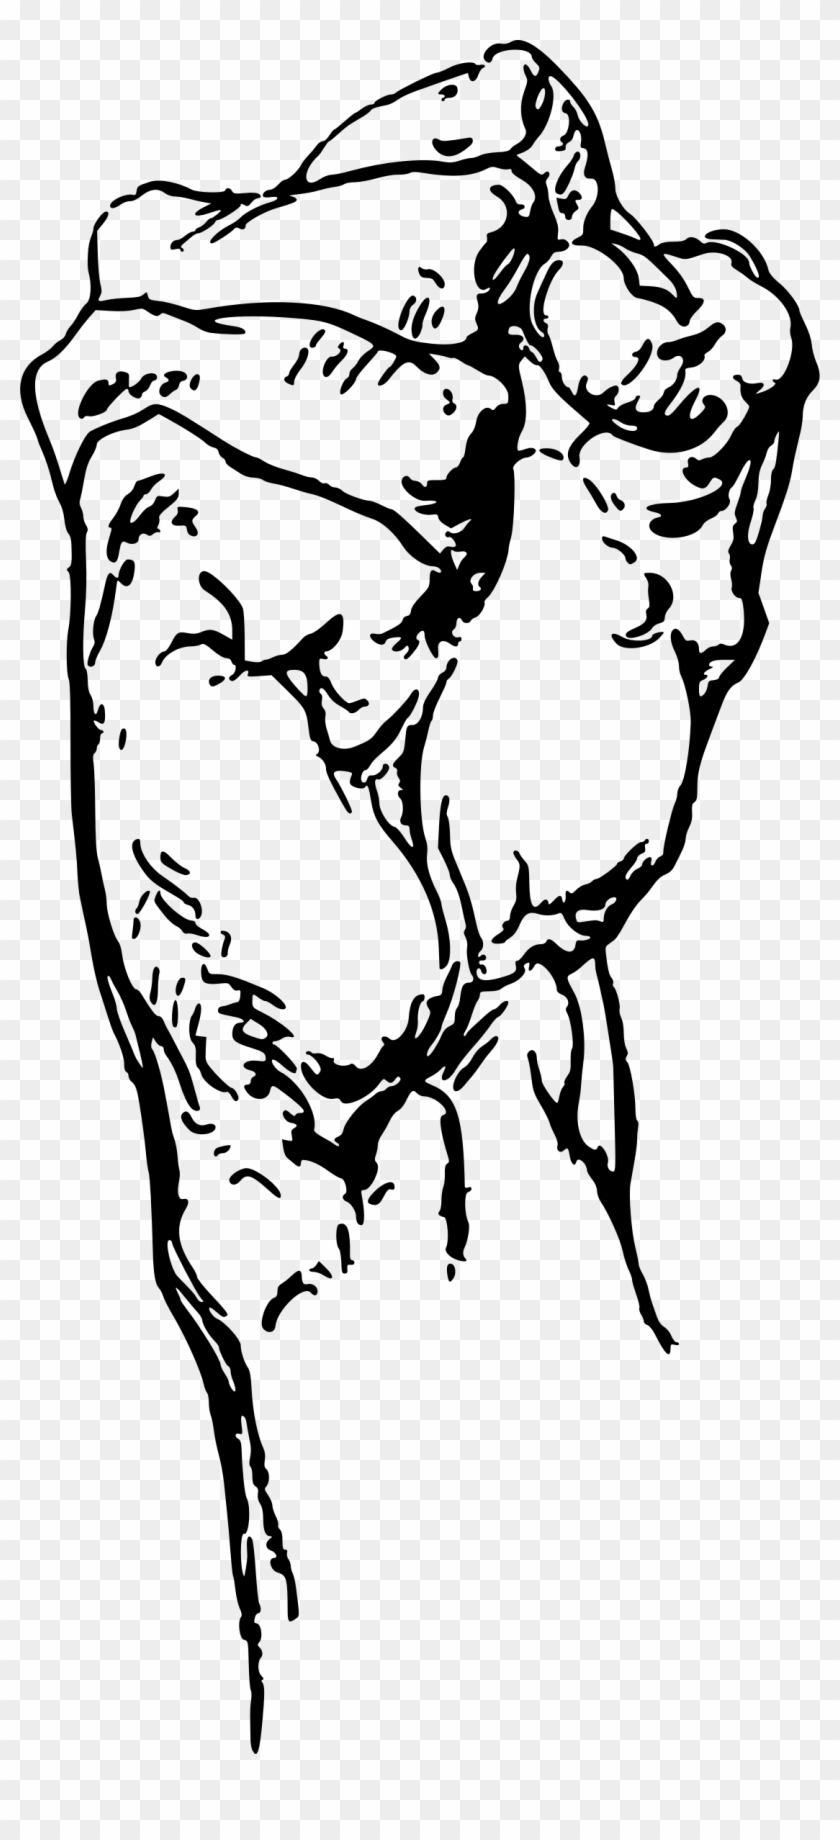 Raised up clenched fist Sketch vector illustration Stock Vector Image   Art  Alamy